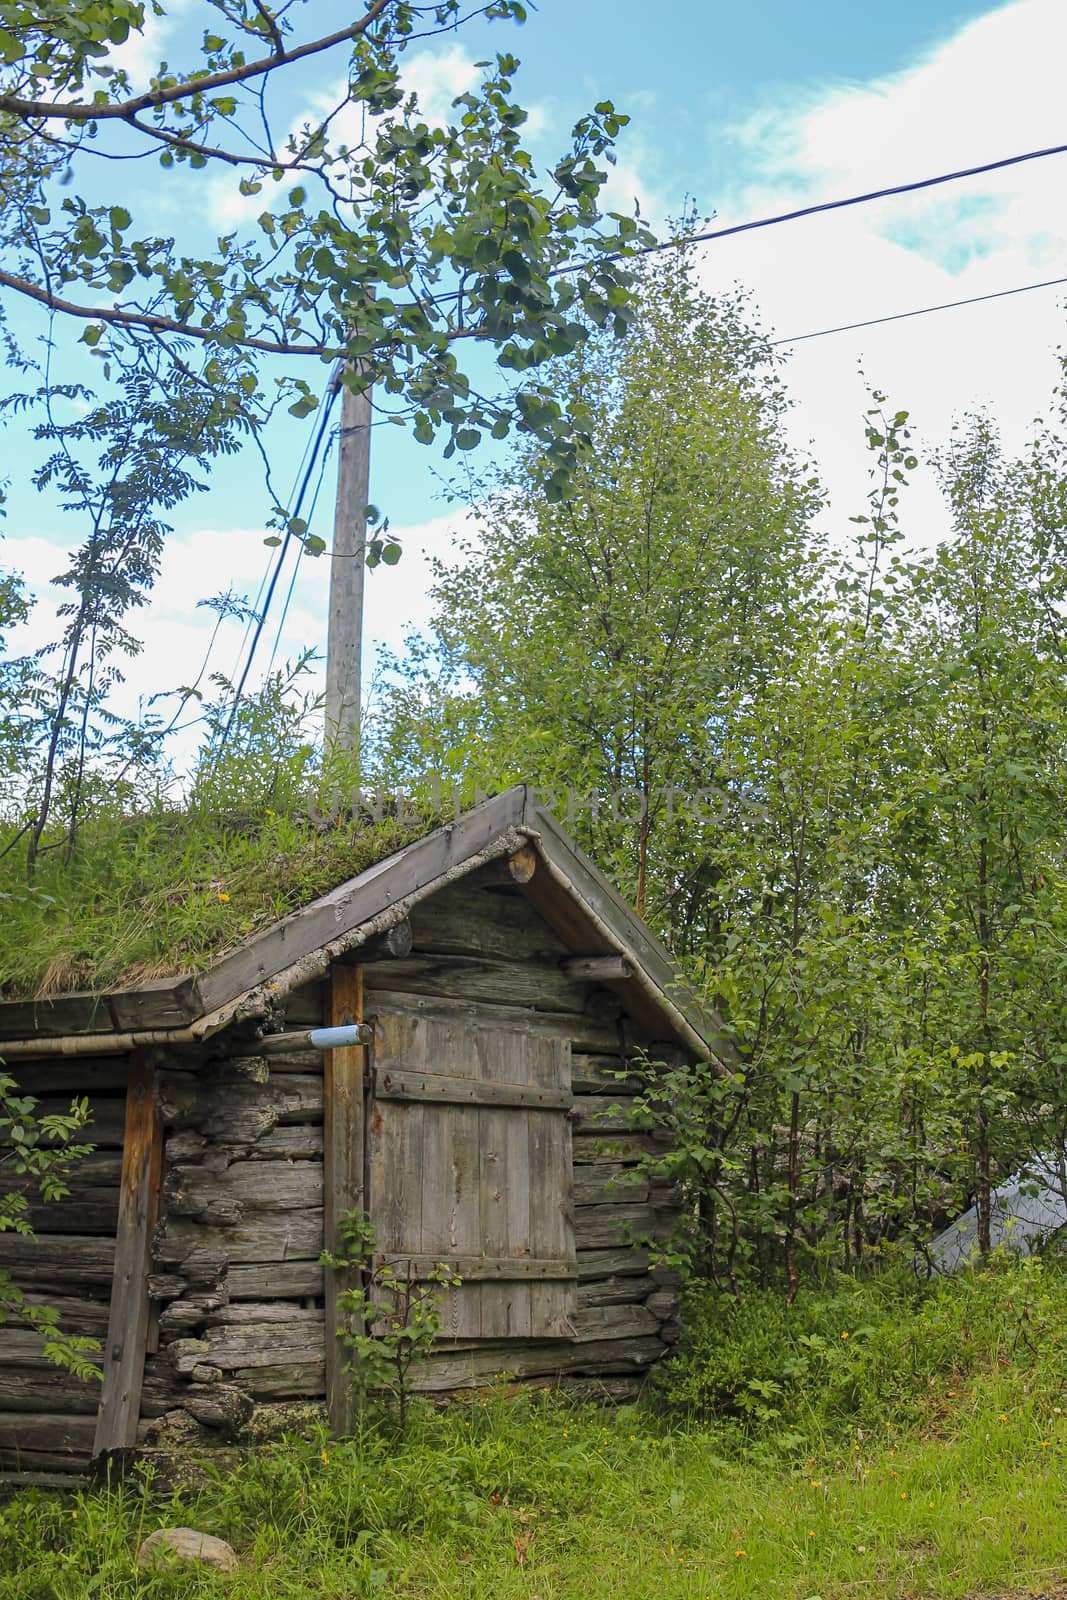 Old wooden cabin hut with overgrown roof in Hemsedal, Norway.